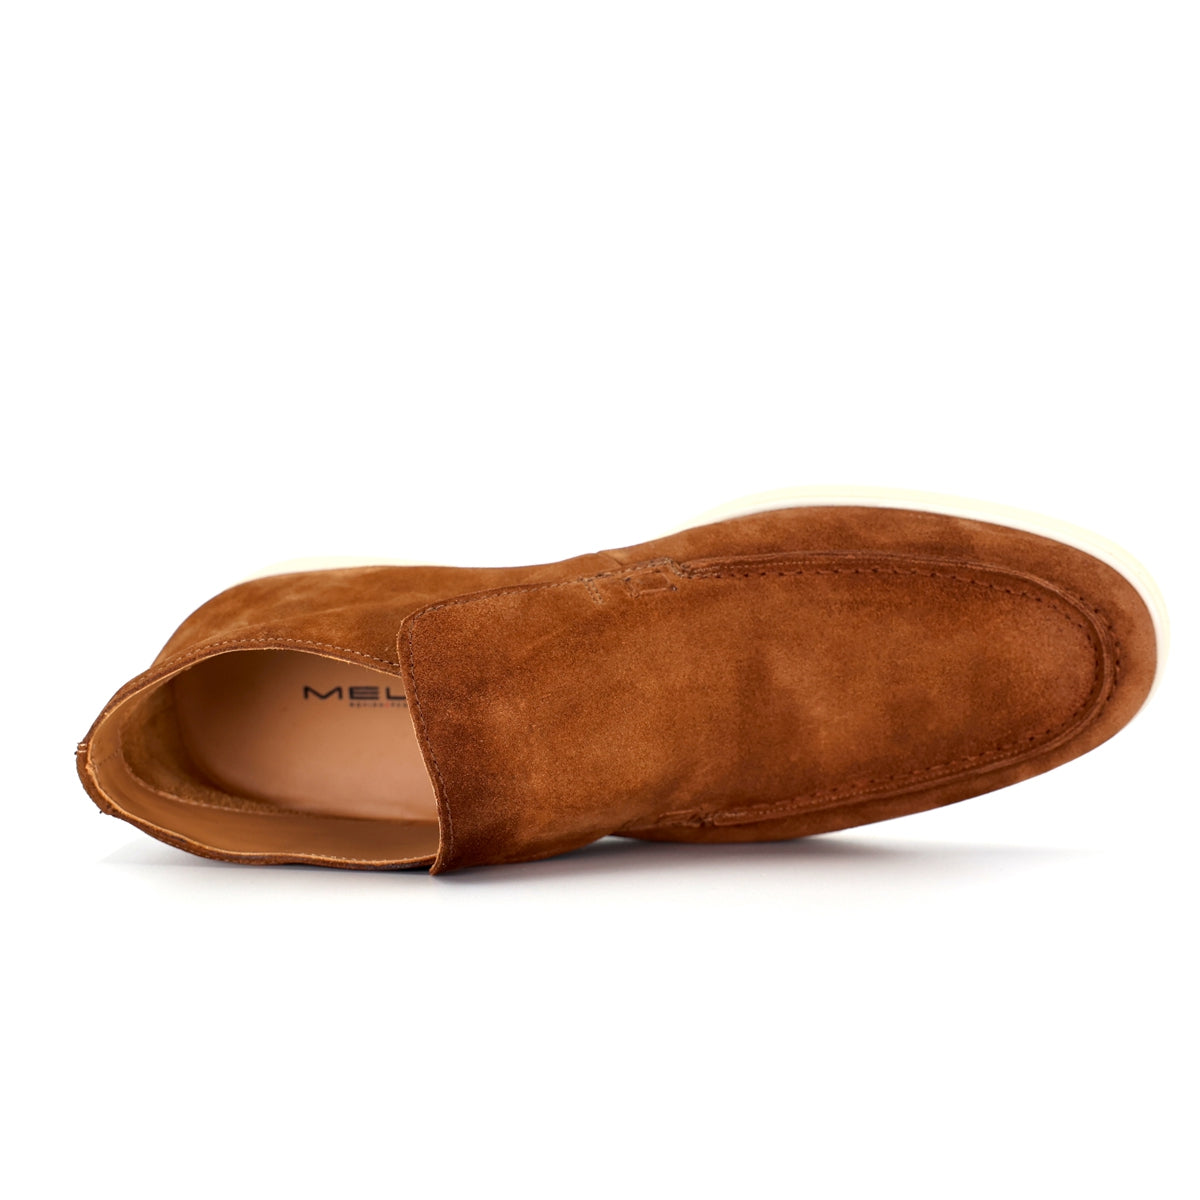 Purday high loafers | Cognac